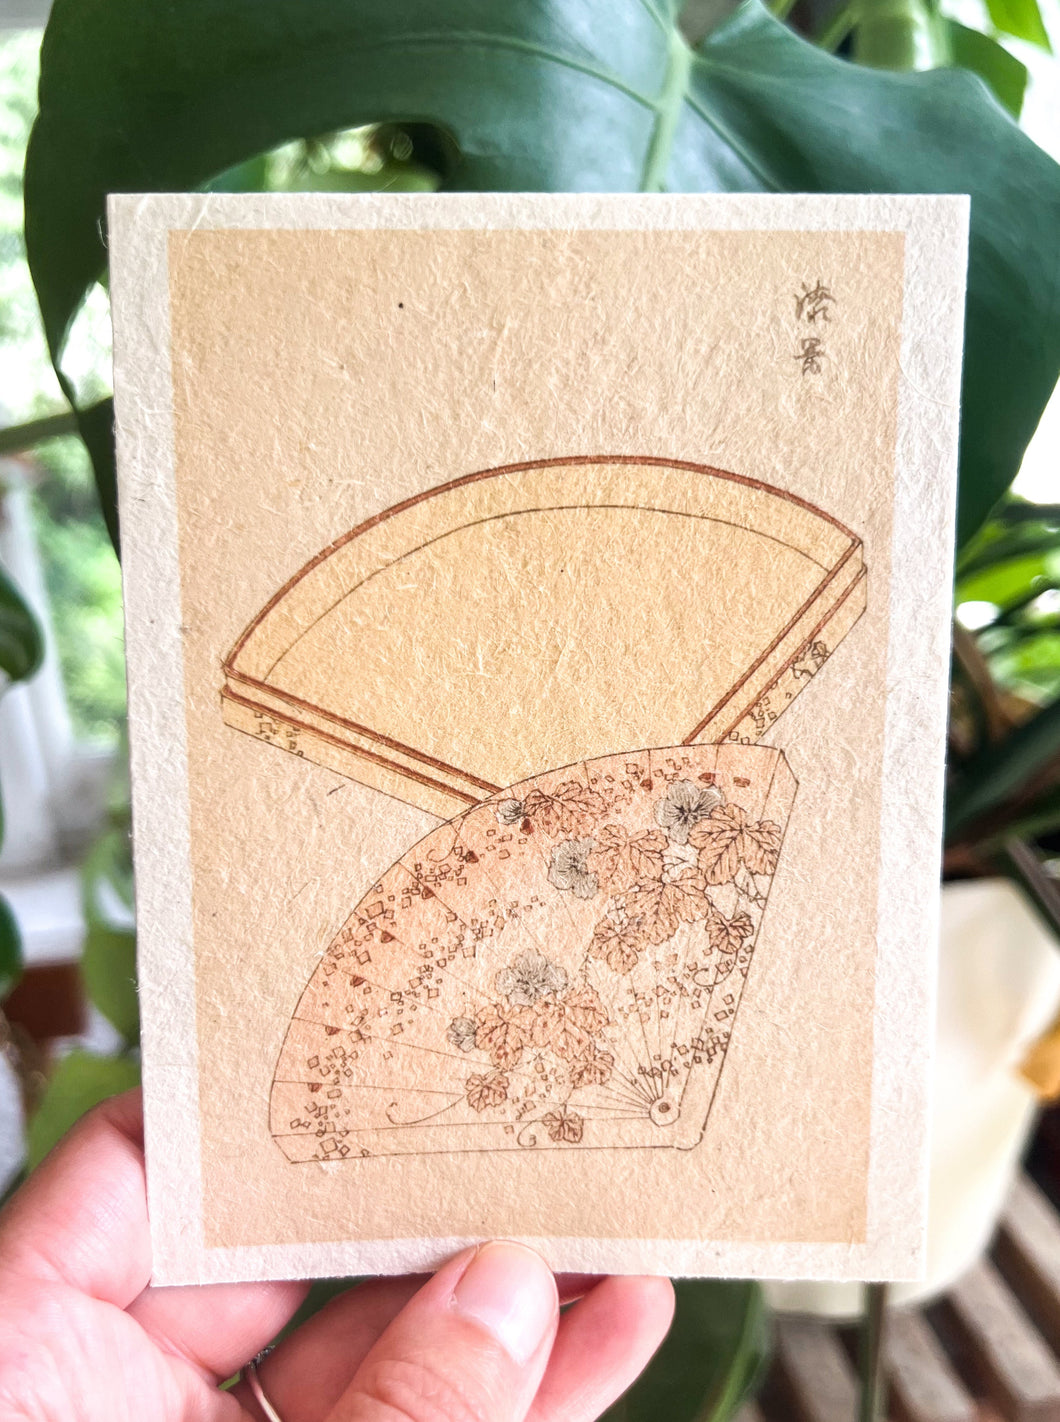 Japanese Plantable Seed Card || Zero Waste || Supports Women || Eco-friendly || J18